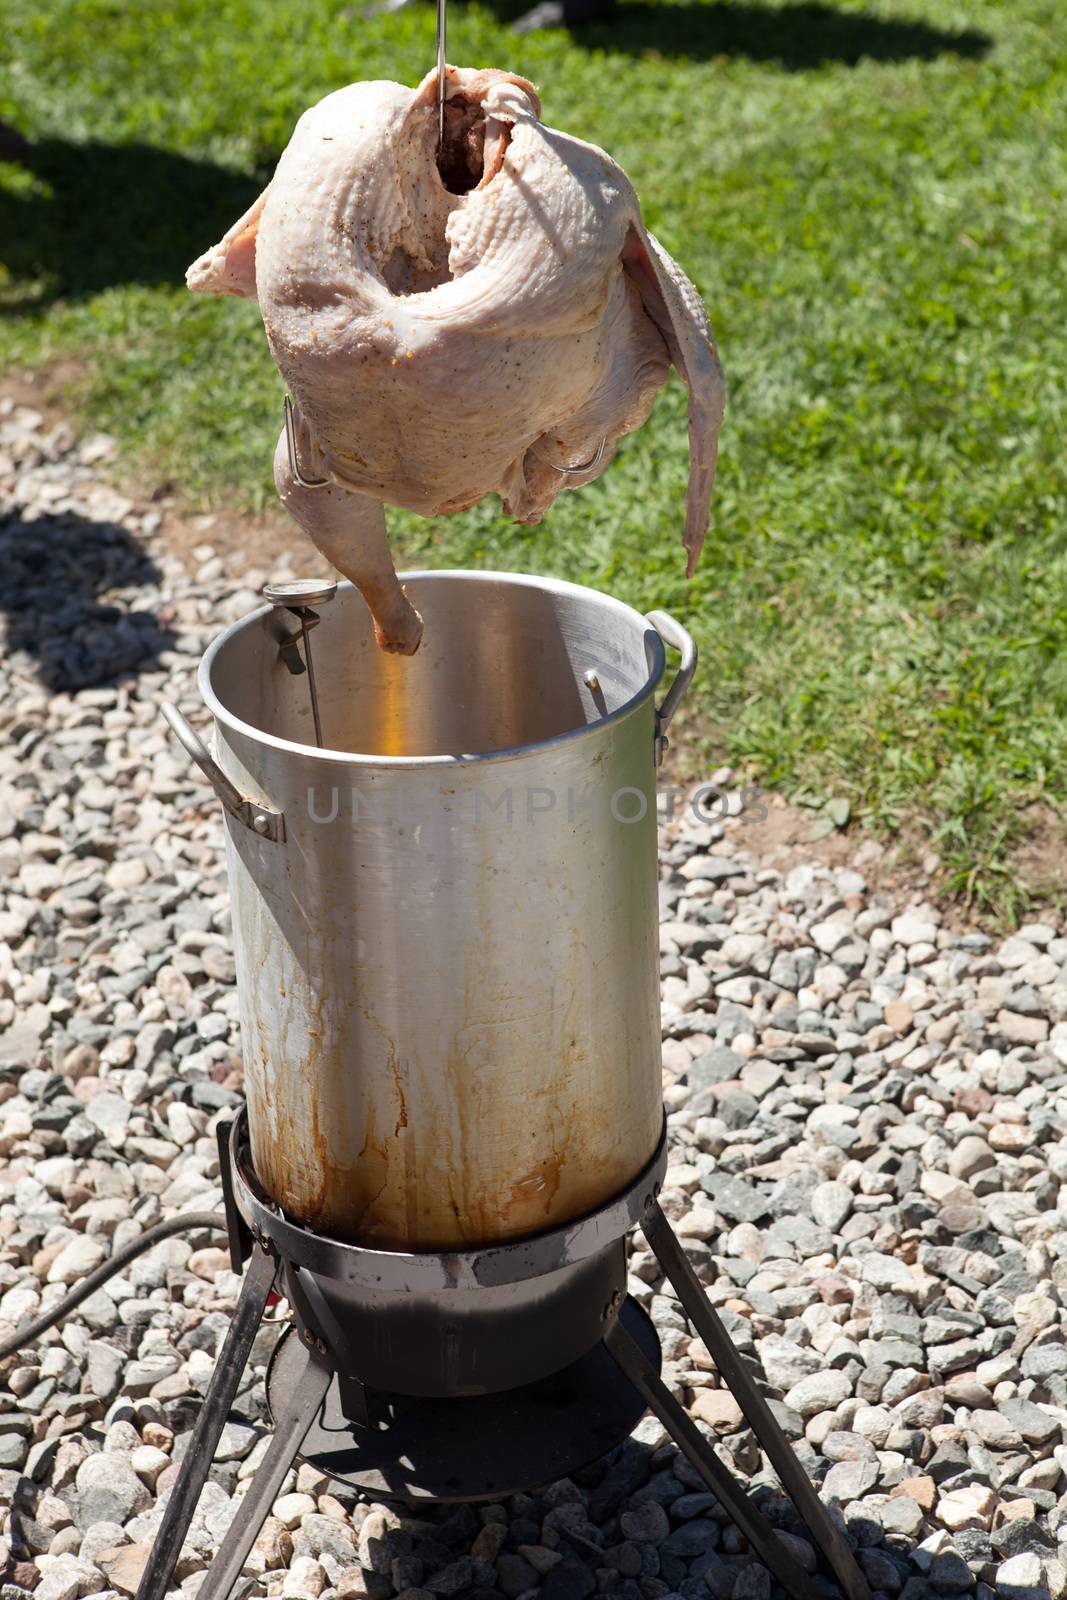 Raw turkey about to be carefully dropped into the outdoor propane frier pot.